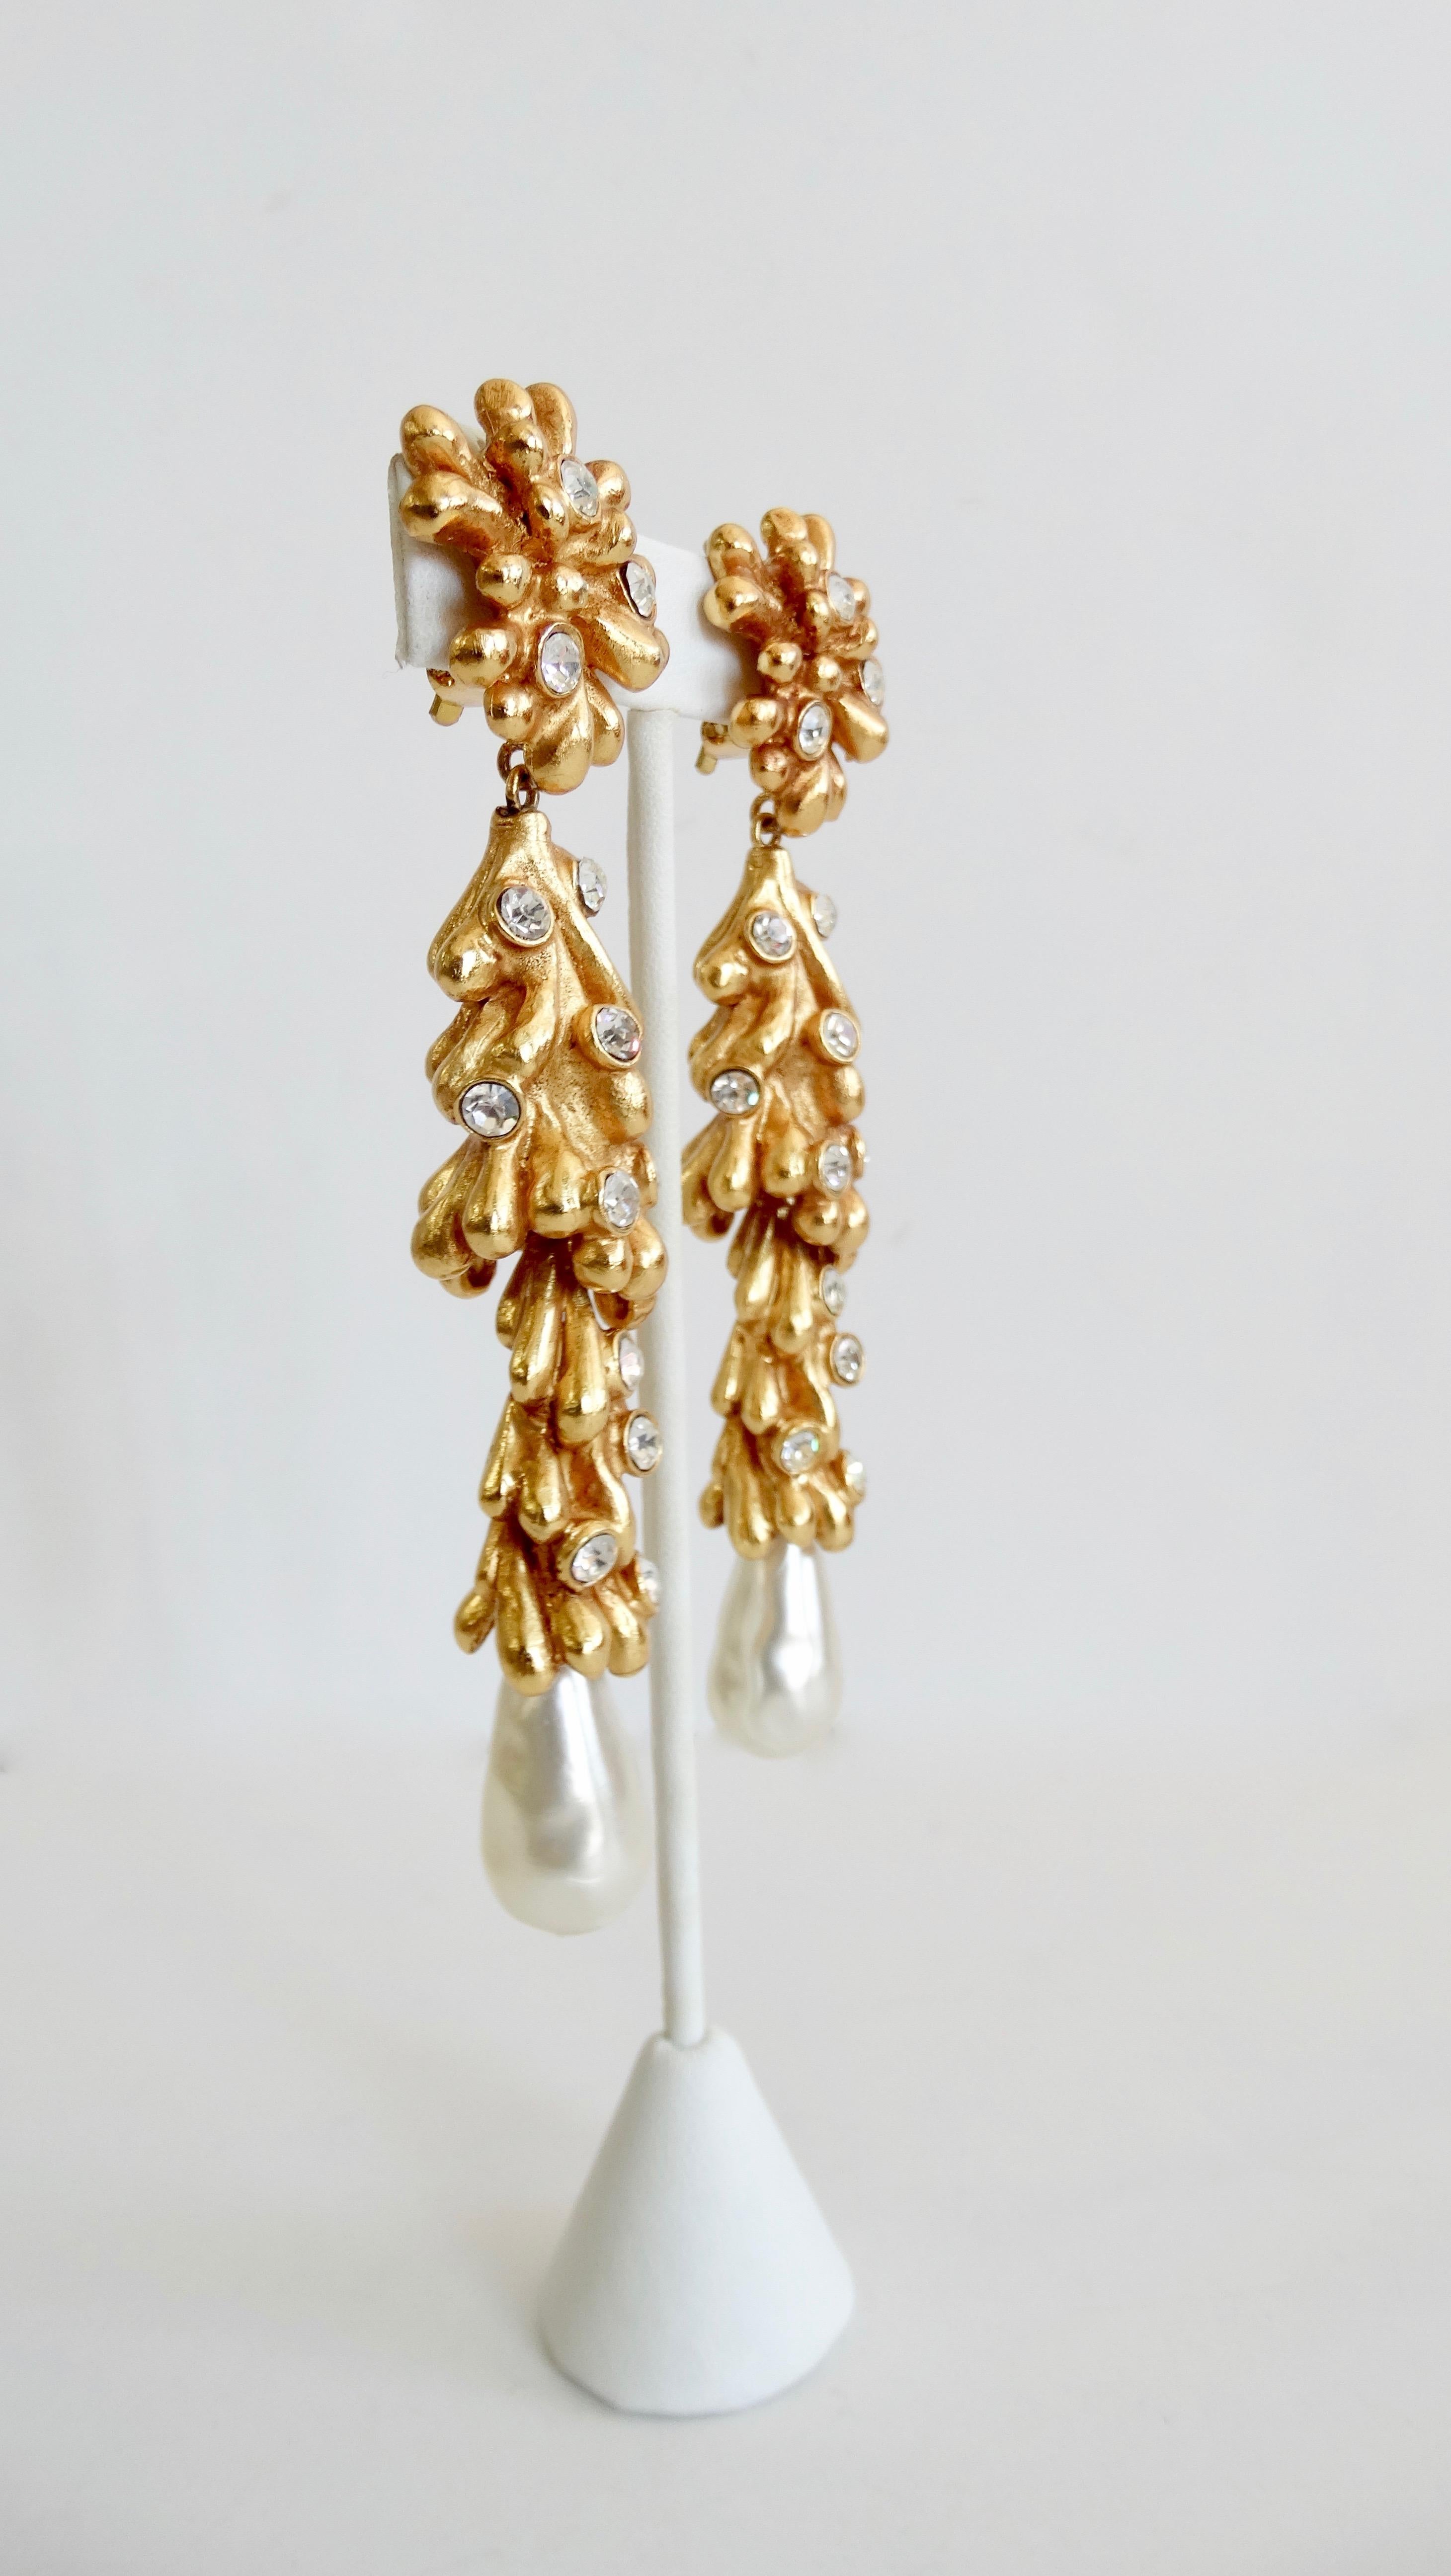 Elevate your collection with an extravagant pair of Christian Lacroix earrings! Circa 1980s, these gold plated earrings are sculpted in the shape of Sea Anemones and are embellished with rhinestones. Features a faux pearl drop and clip-on closures.